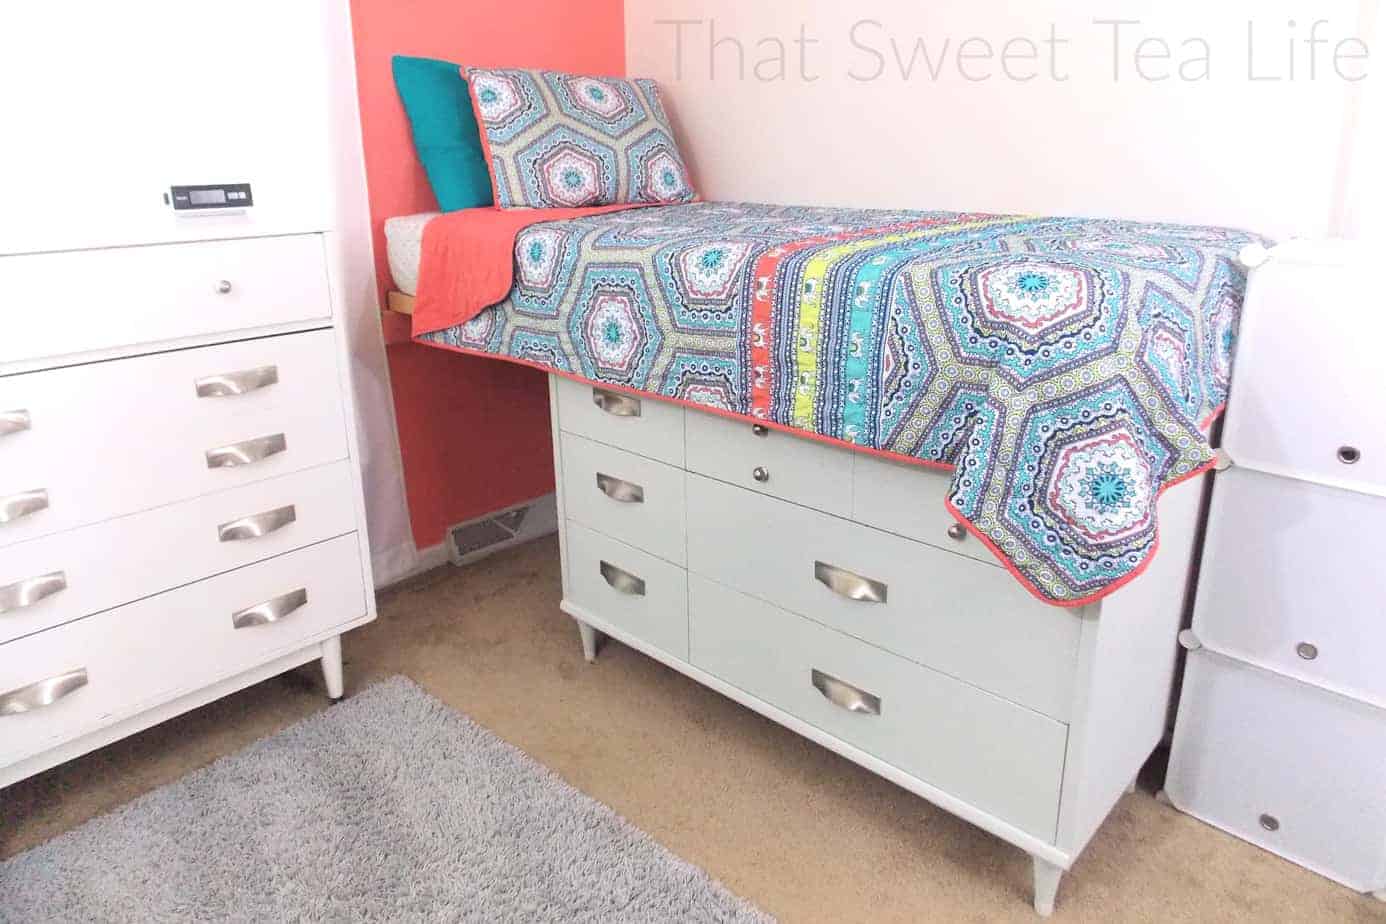 How To Make Beds With Storage, Twin Bed Frame With Storage Underneath Diy